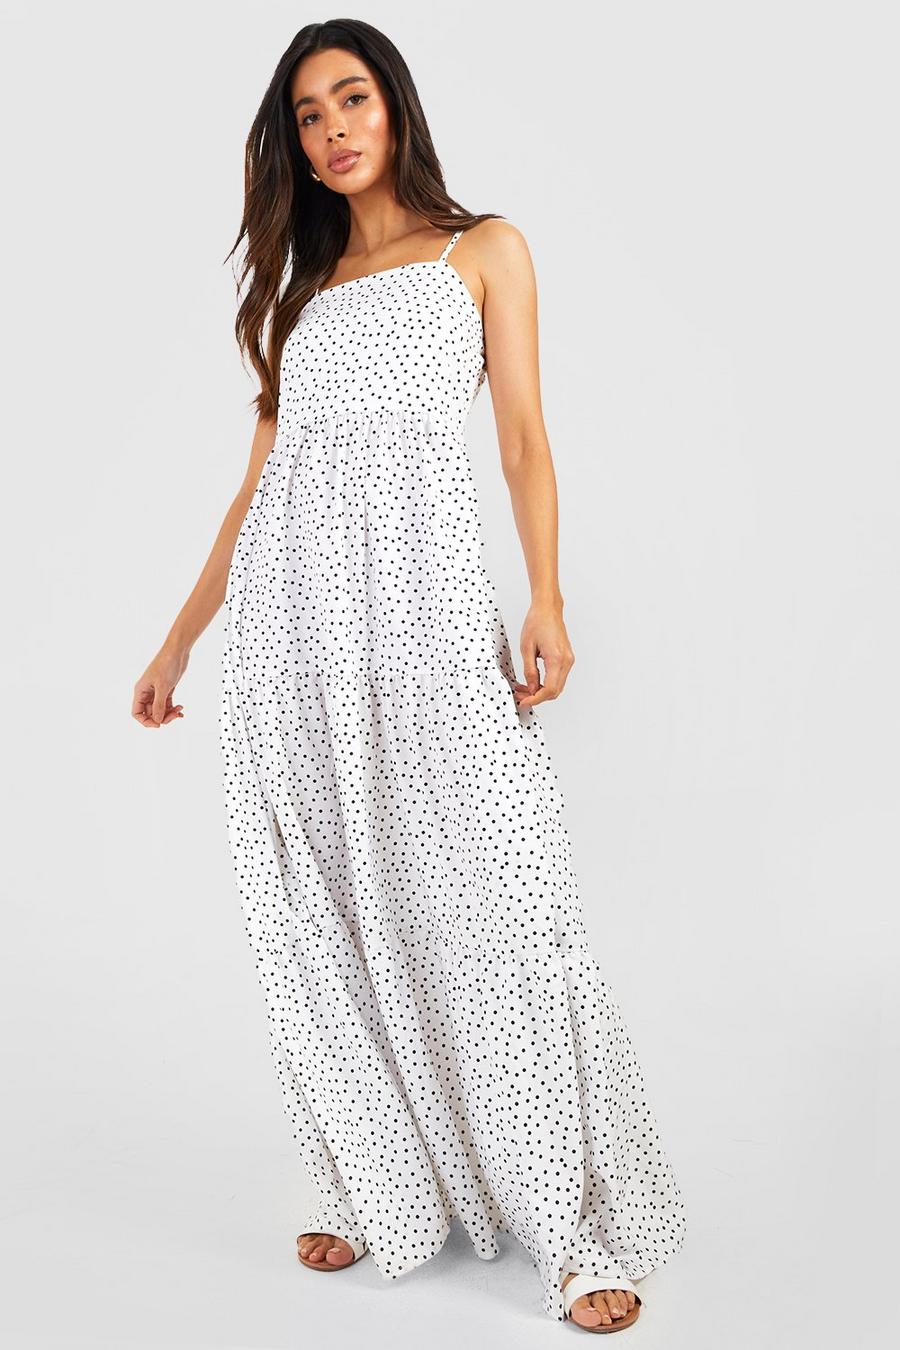 Ivory Polka Dot Tiered Maxi Dress image number 1